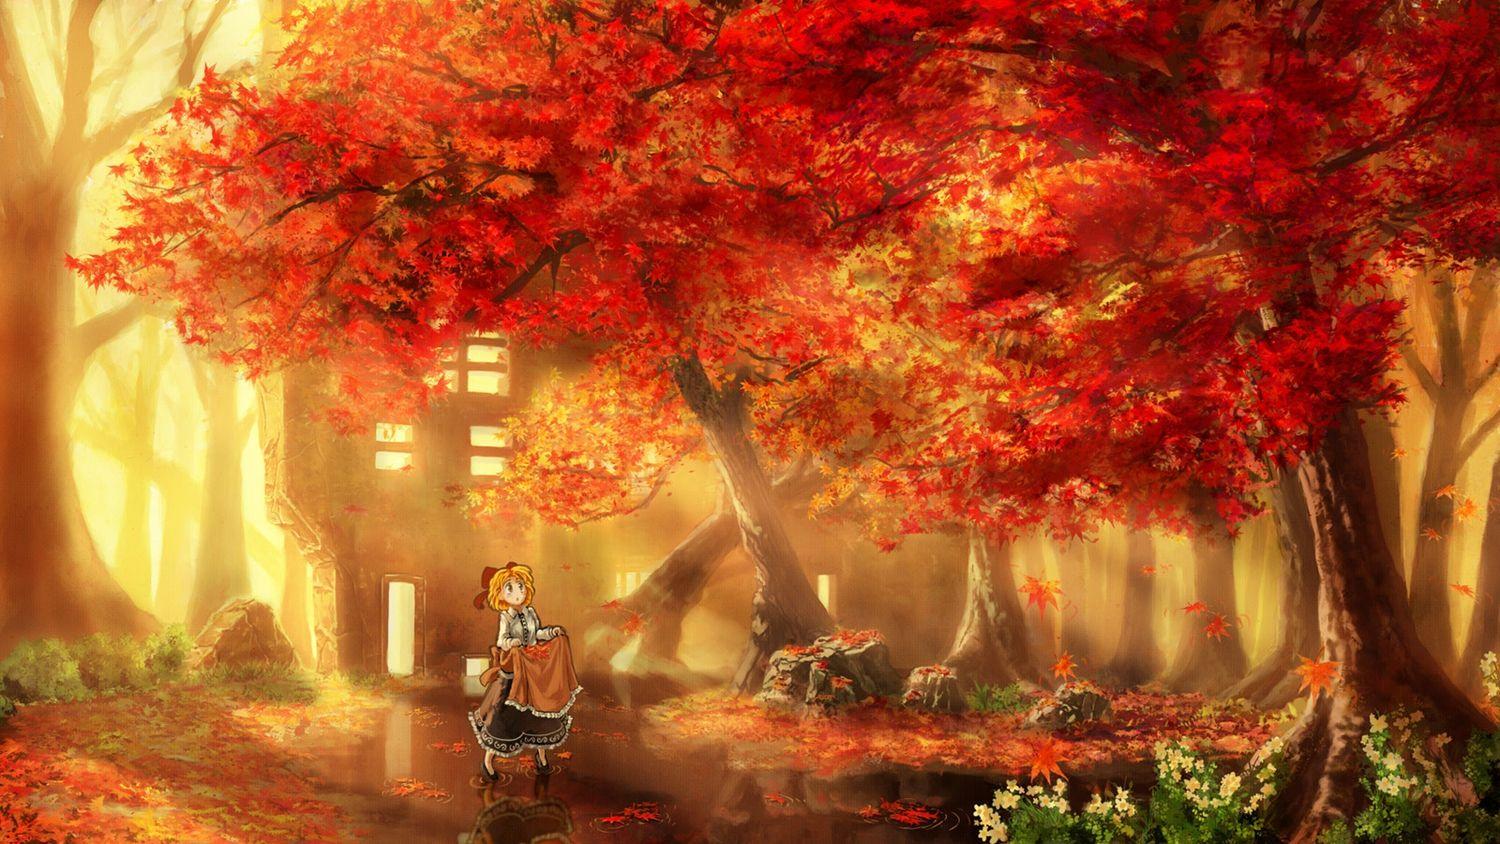 Autumn Anime Wallpapers Top Free Autumn Anime Backgrounds